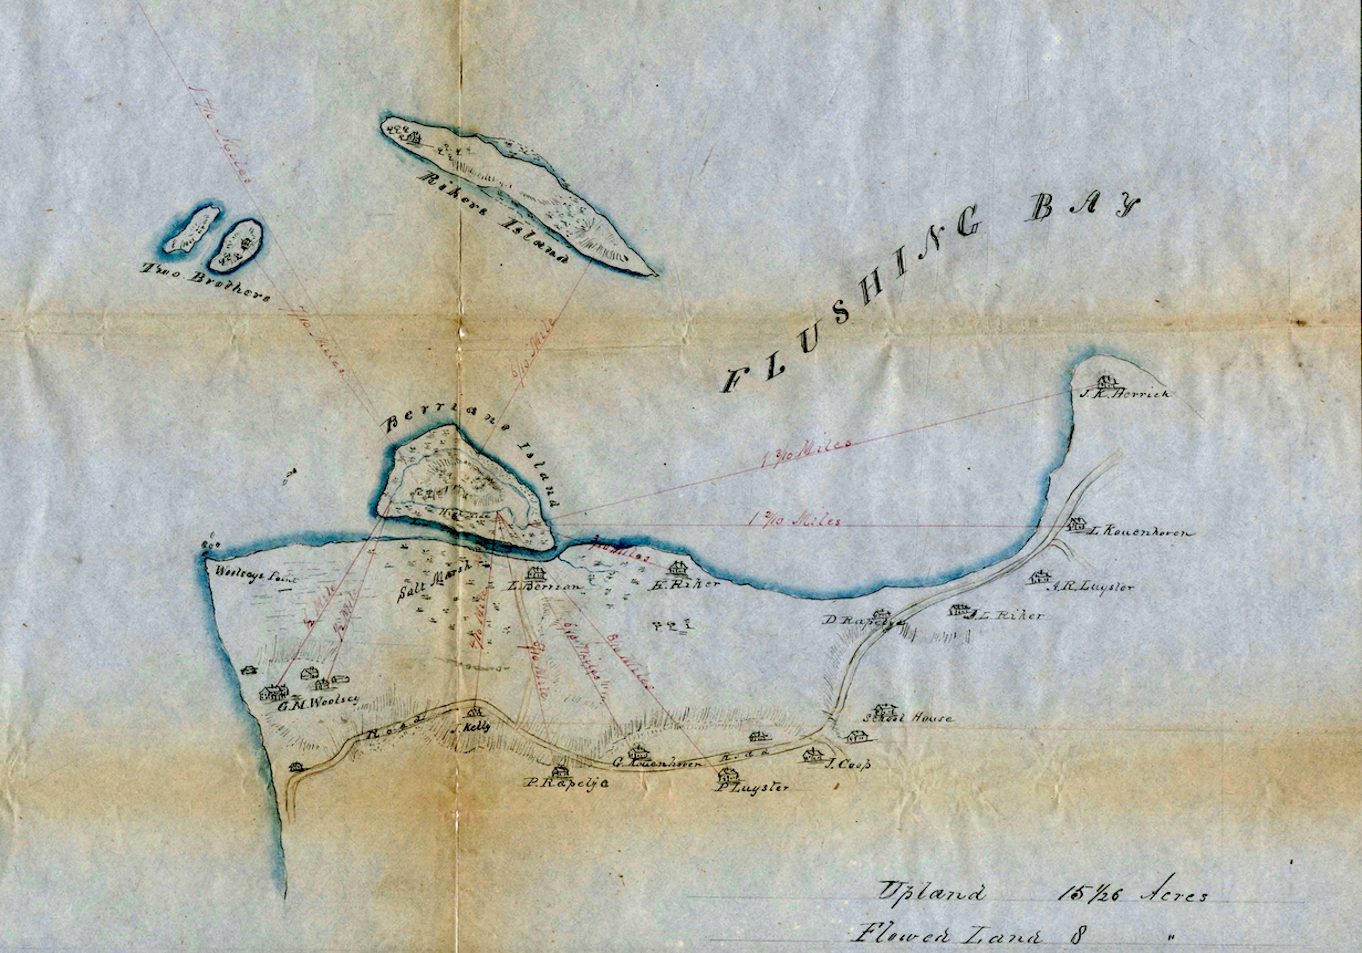 A map from 1849 showing Berrien’s Island along with Luyster’s and Riker’s Island. (Courtesy Queens Historical Society)